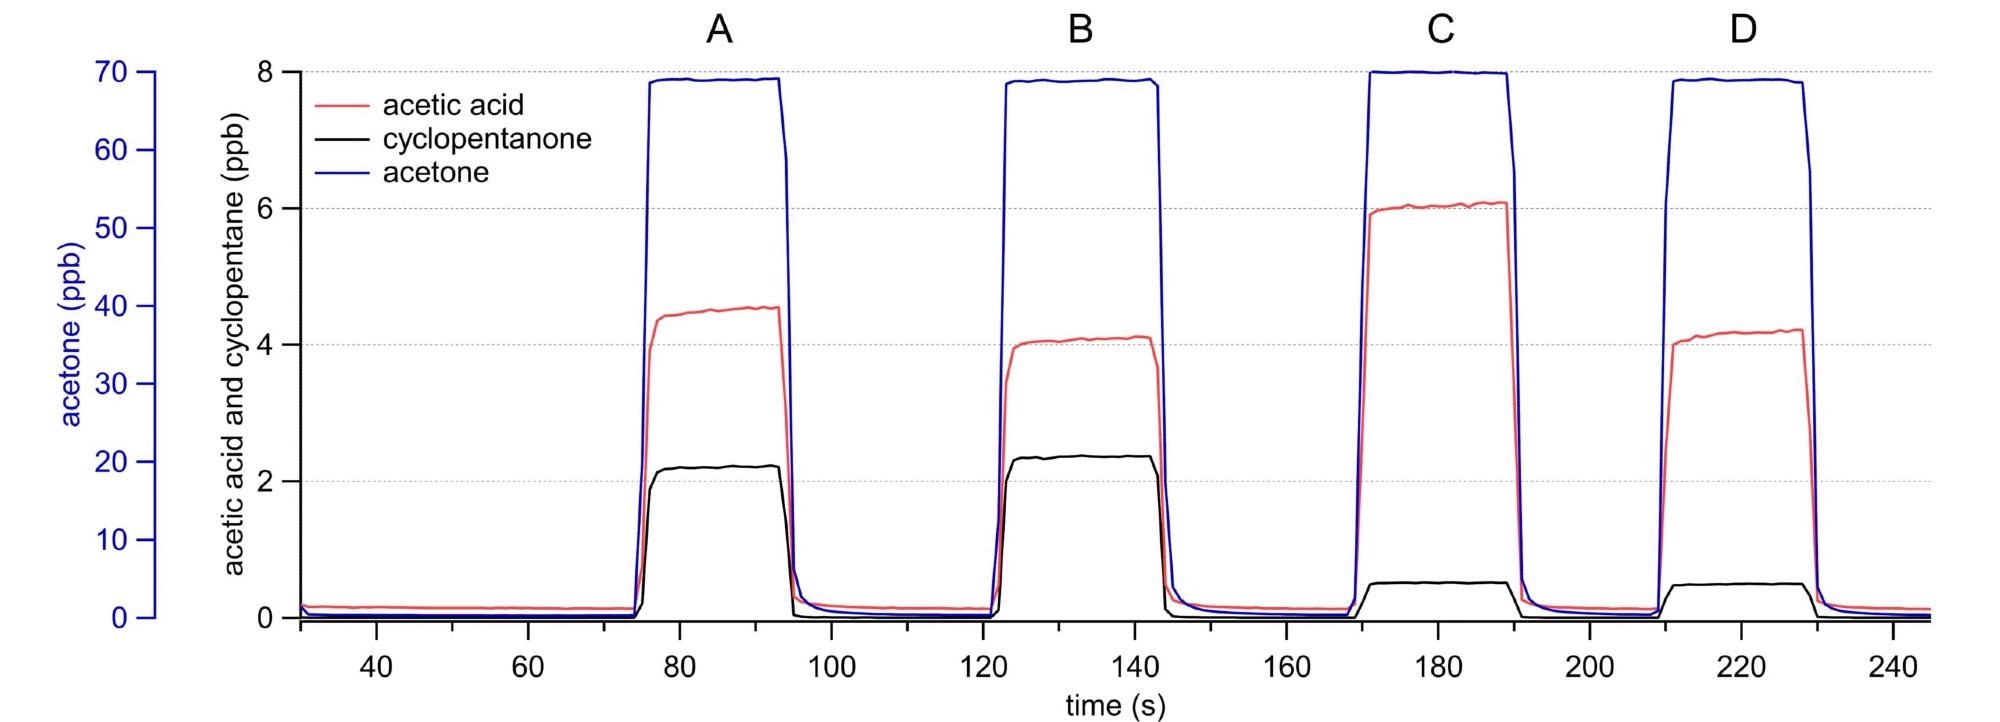 Sampling in each point from the cleanrooms. The trends in concentration of cyclopentanone (black) show a clear difference between the two cleanrooms while acetic acid (red) shows slight concentration differences in the location inside each clean room; finally acetone (blue) had a constant concentration independently of the sampling point.